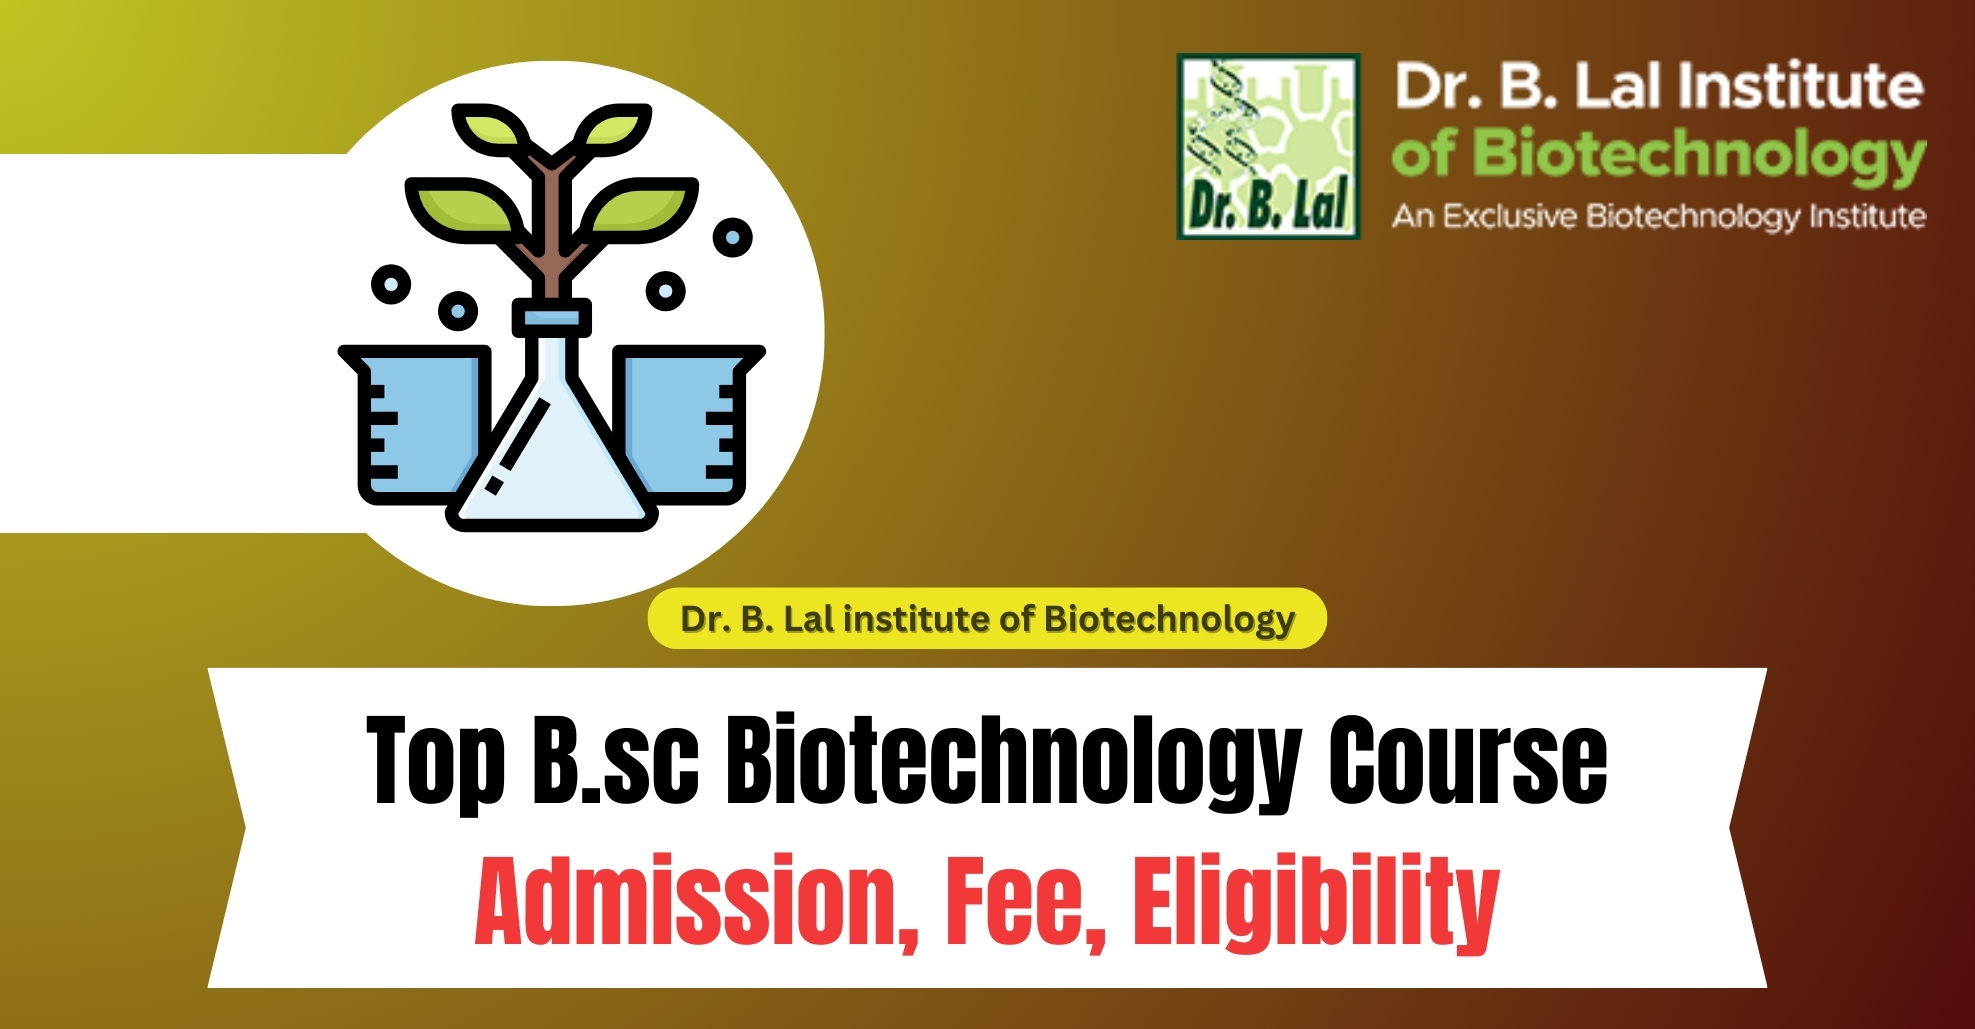 Top B.sc biotechnology course: admission, fee, eligibility